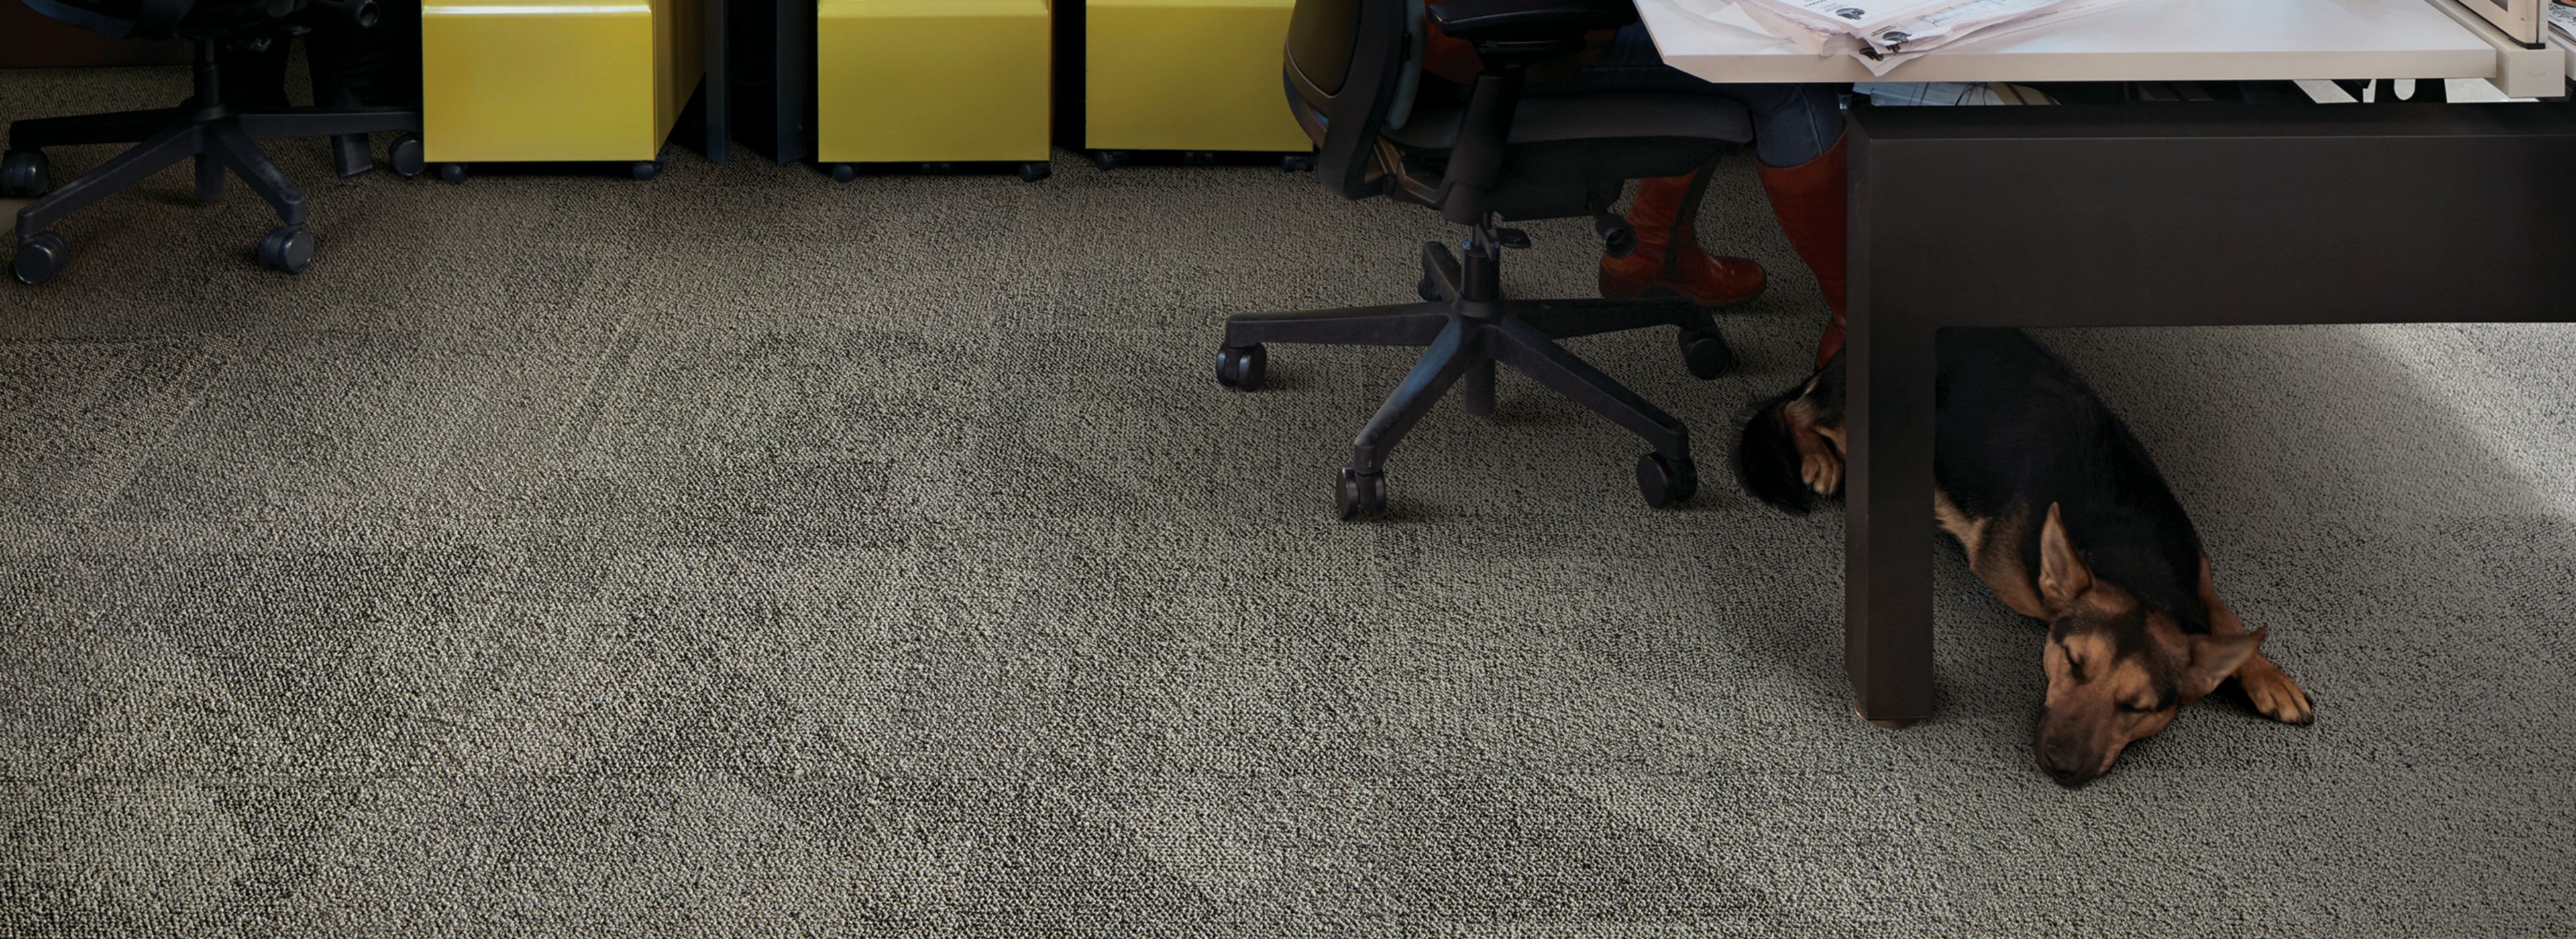 image Interface Paver carpet tile and HN850 plank carpet tile in open office area with multiple people working at desk numéro 1